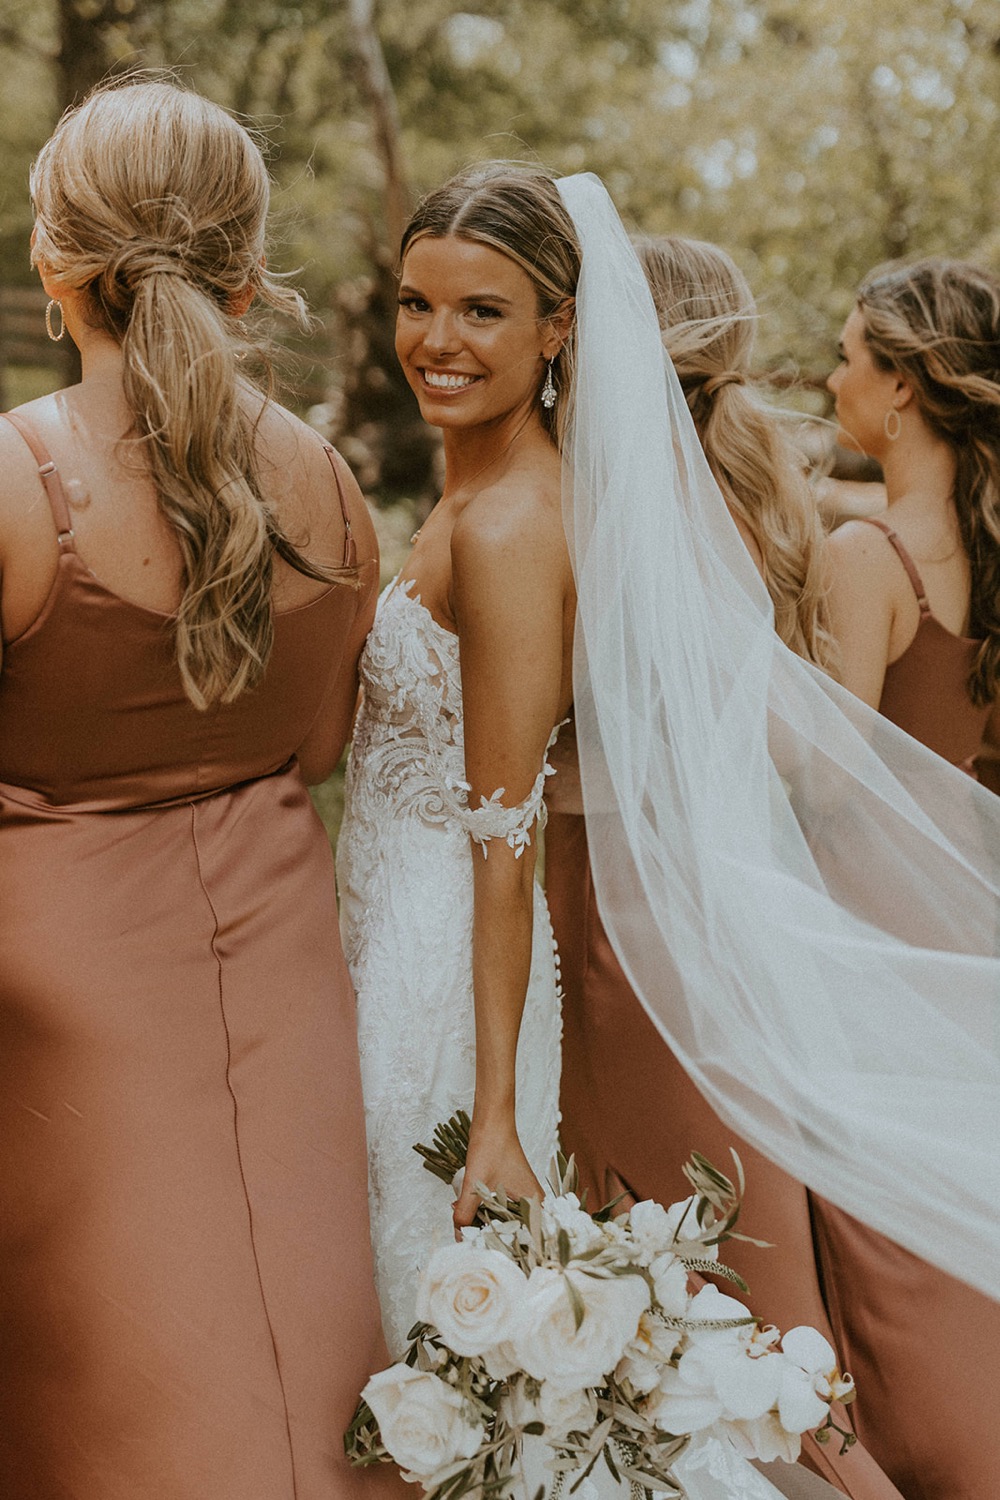 Bride looking back and smiling at the camera next to her bridesmaids, shot by elegant wedding photographer McKenna Christine